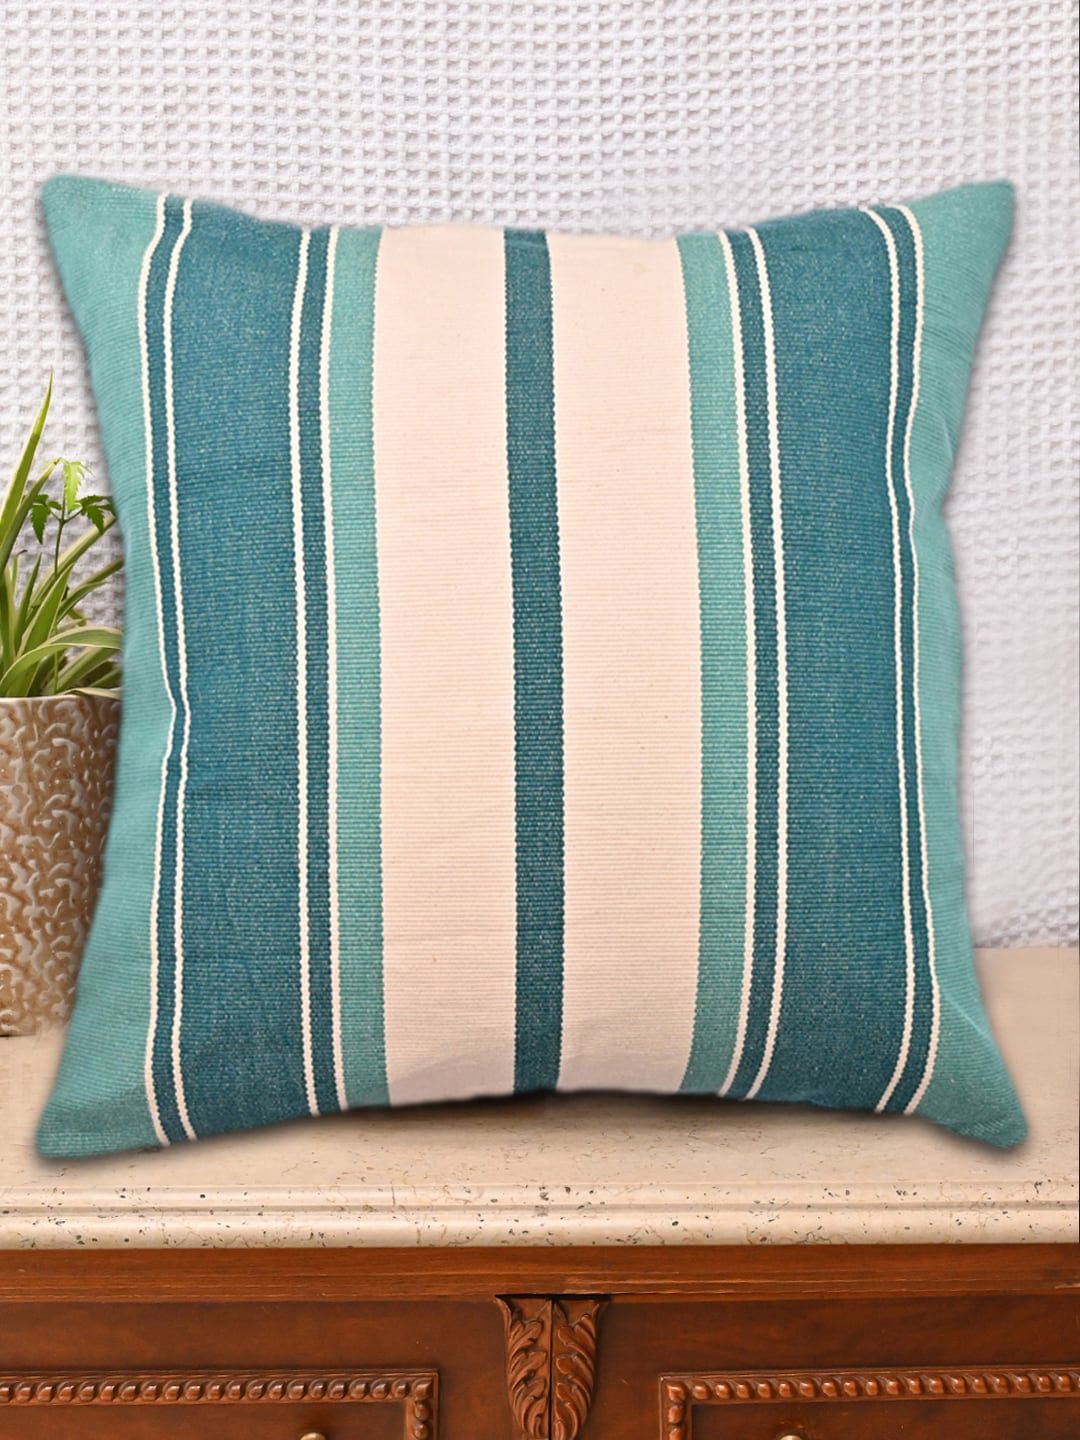 AVI Living Turquoise Blue & Beige Striped Cotton Cushion Cover Price in India